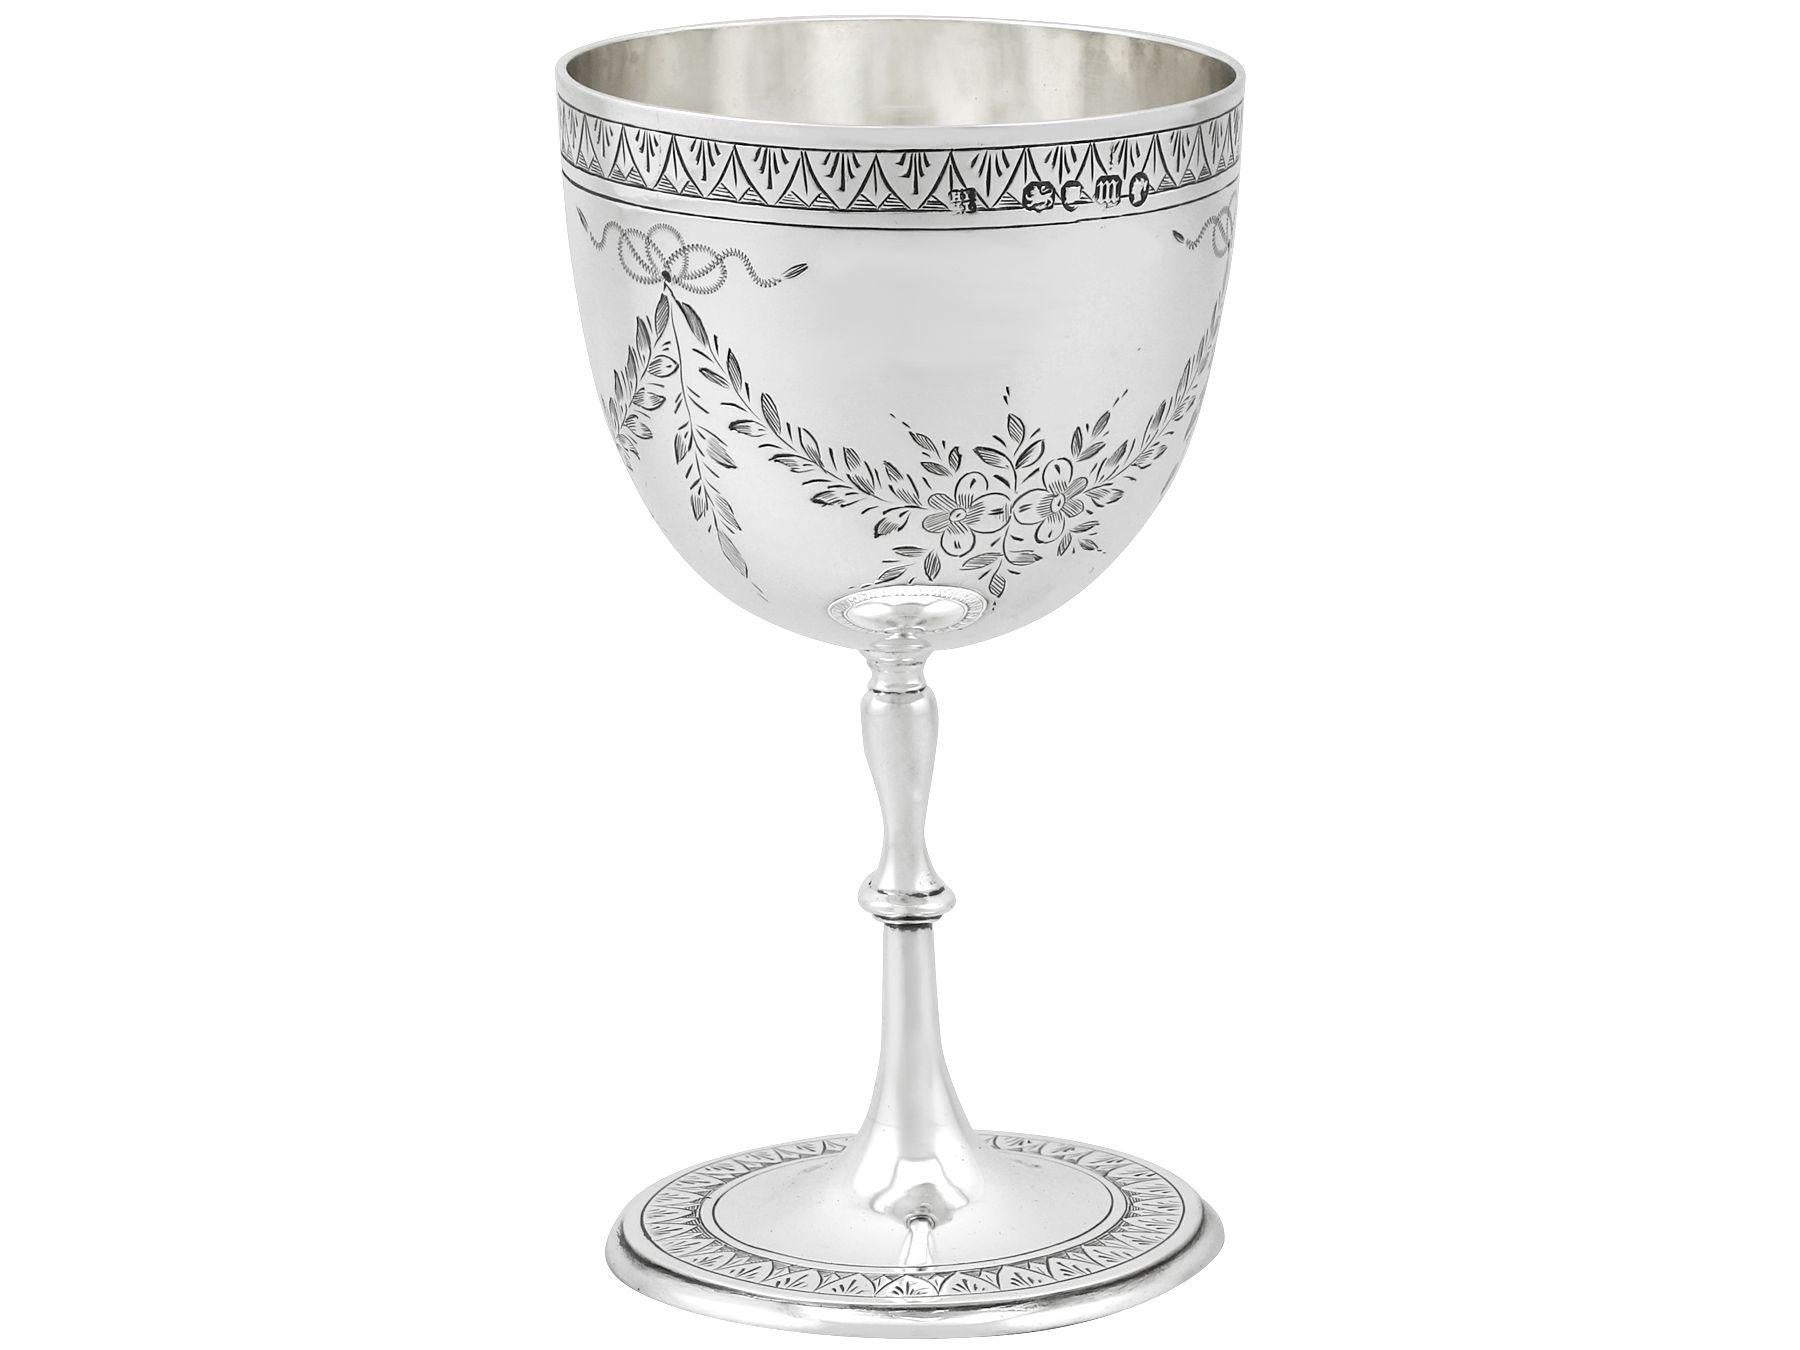 An exceptional, fine and impressive, antique Victorian English sterling silver goblet; an addition to our collection of wine and drinks related silverware.

This exceptional antique Victorian silver goblet, in sterling standard, has a circular